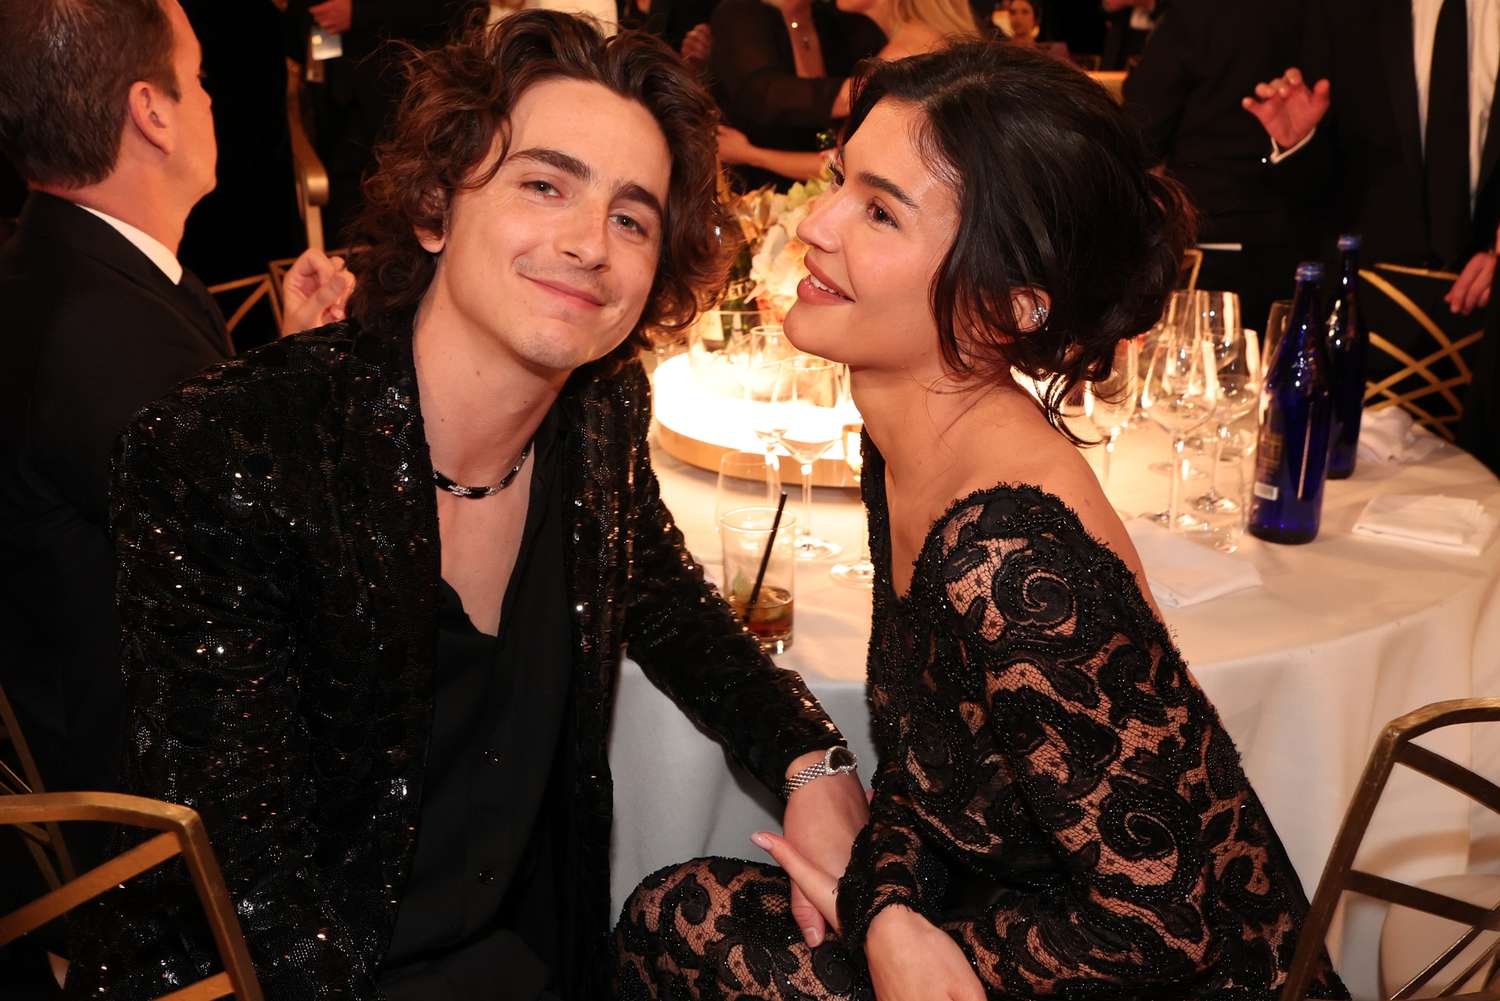 Timothee Chalamet And Kylie Jenner’s Golden Globes Appearance